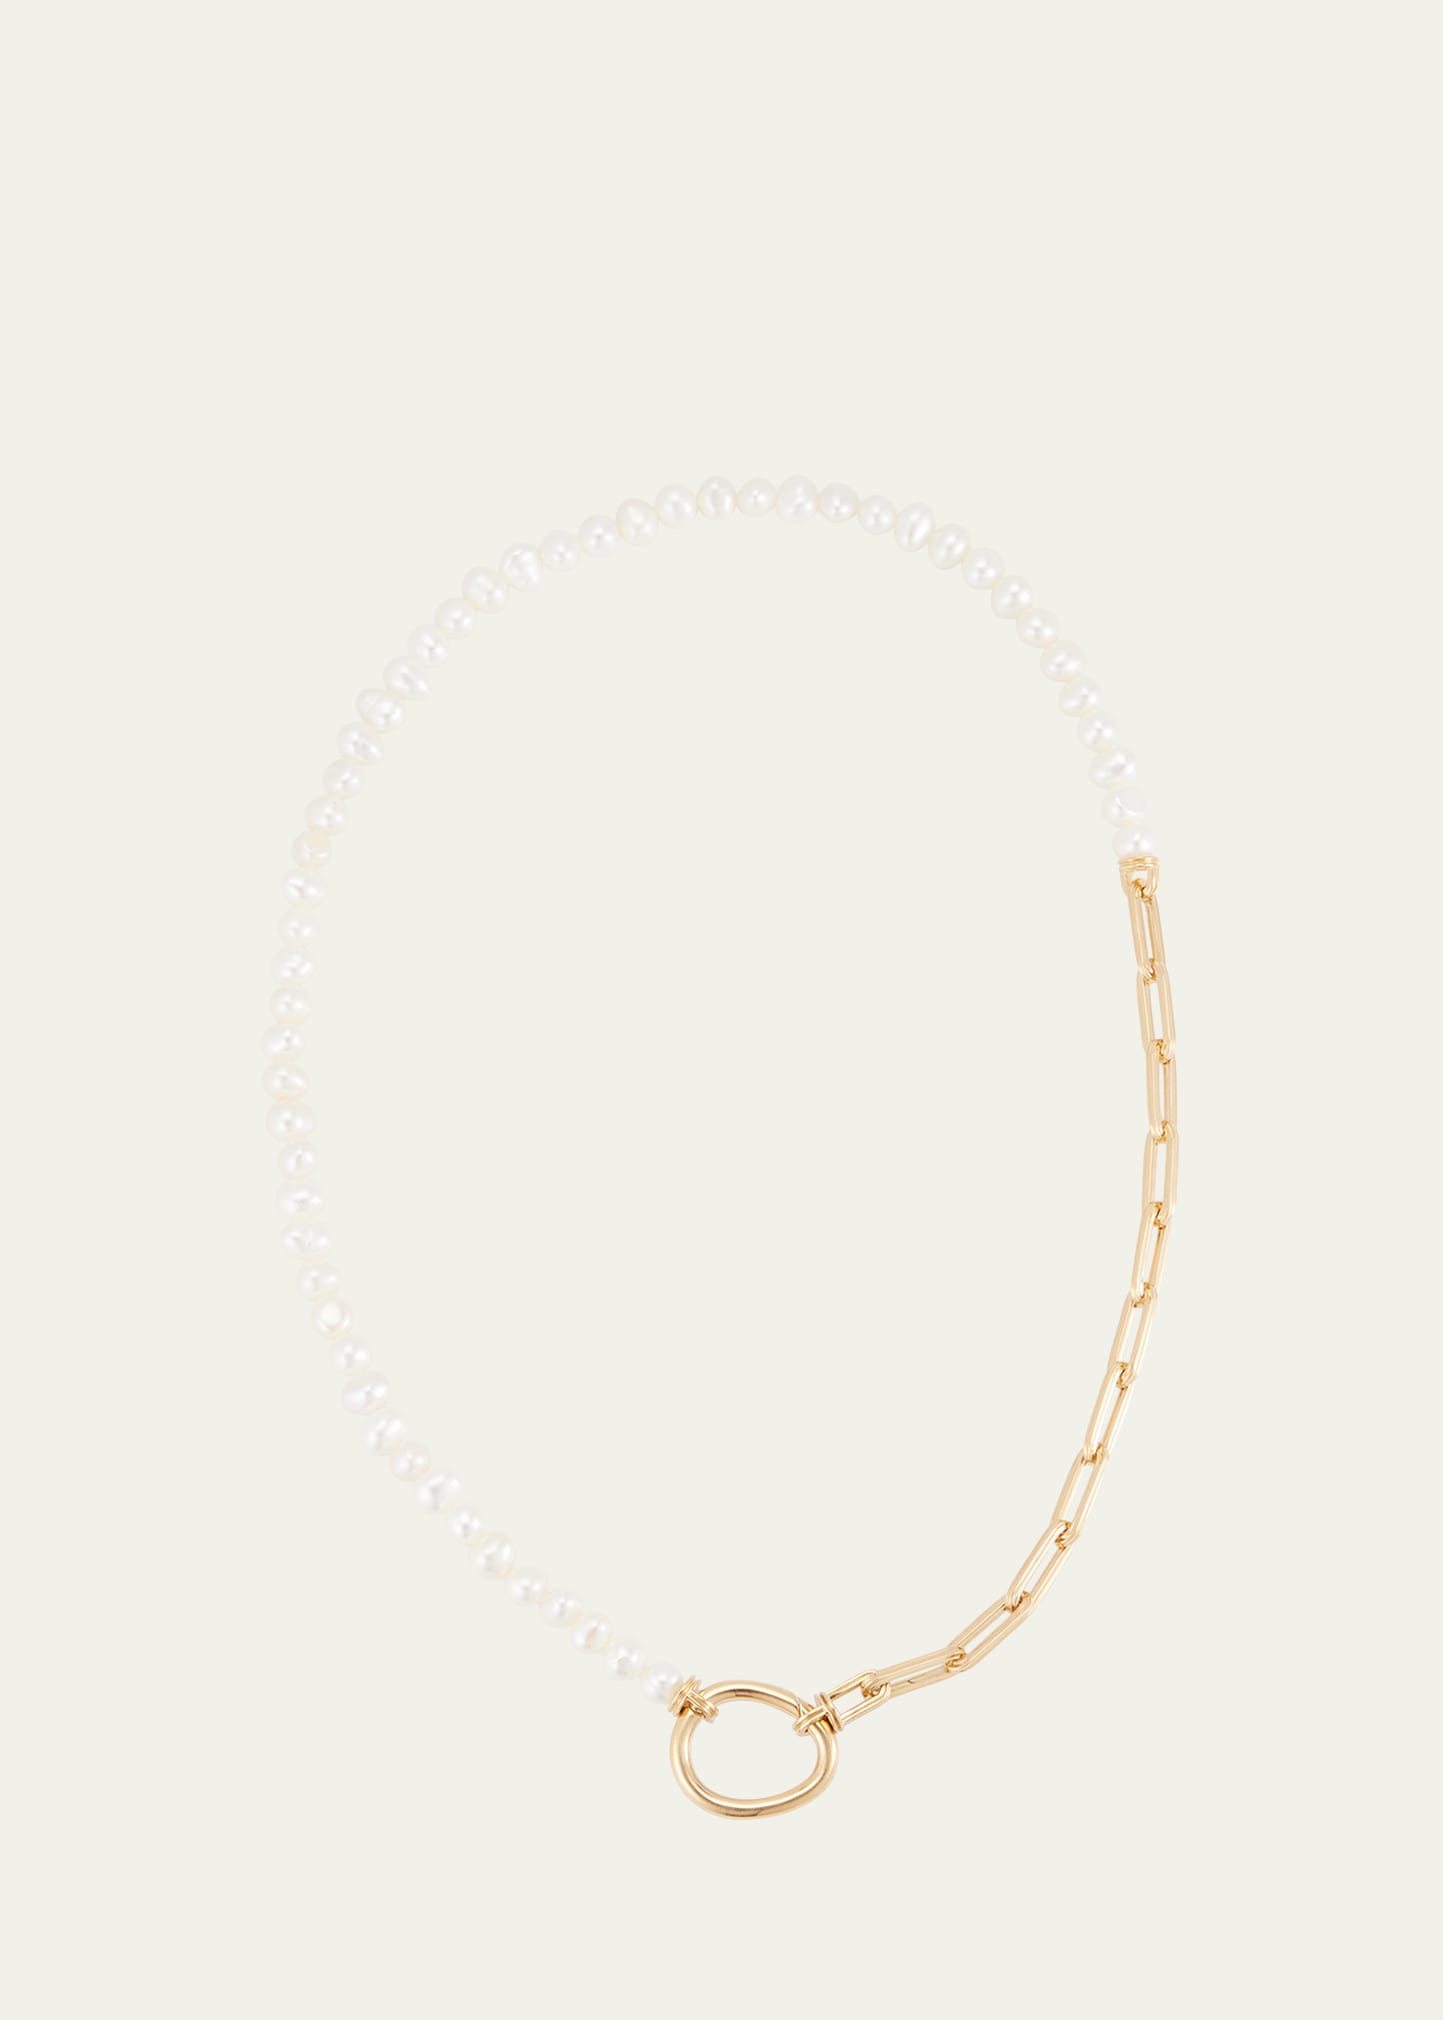 Mellerio 18k Yellow Gold Lien Perles Necklace With 50 Freshwater Pearls